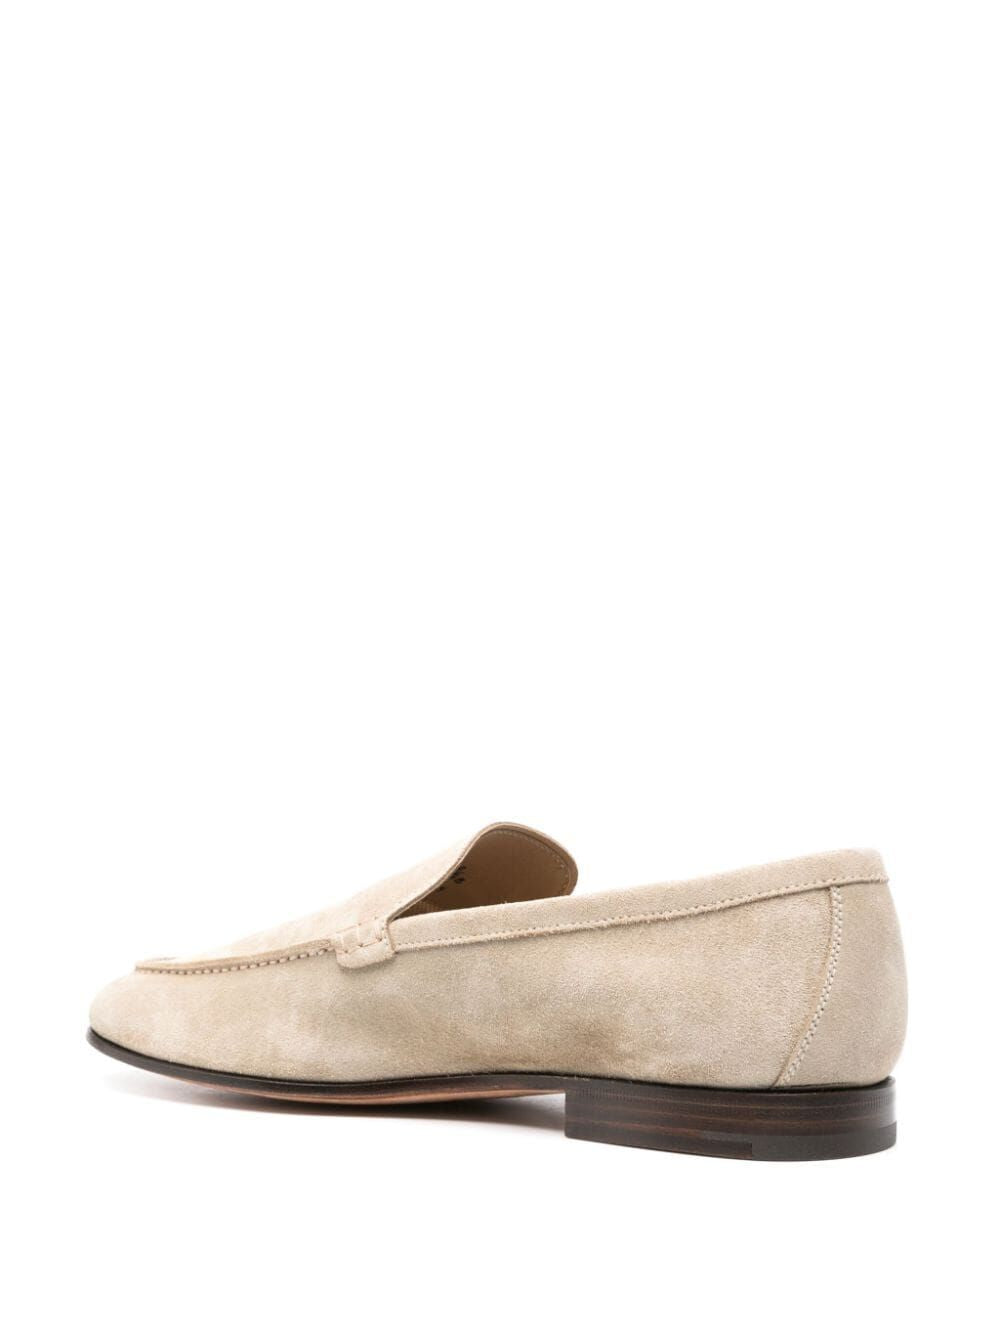 CHURCH'S Tan Calf Leather Moccasins for Men